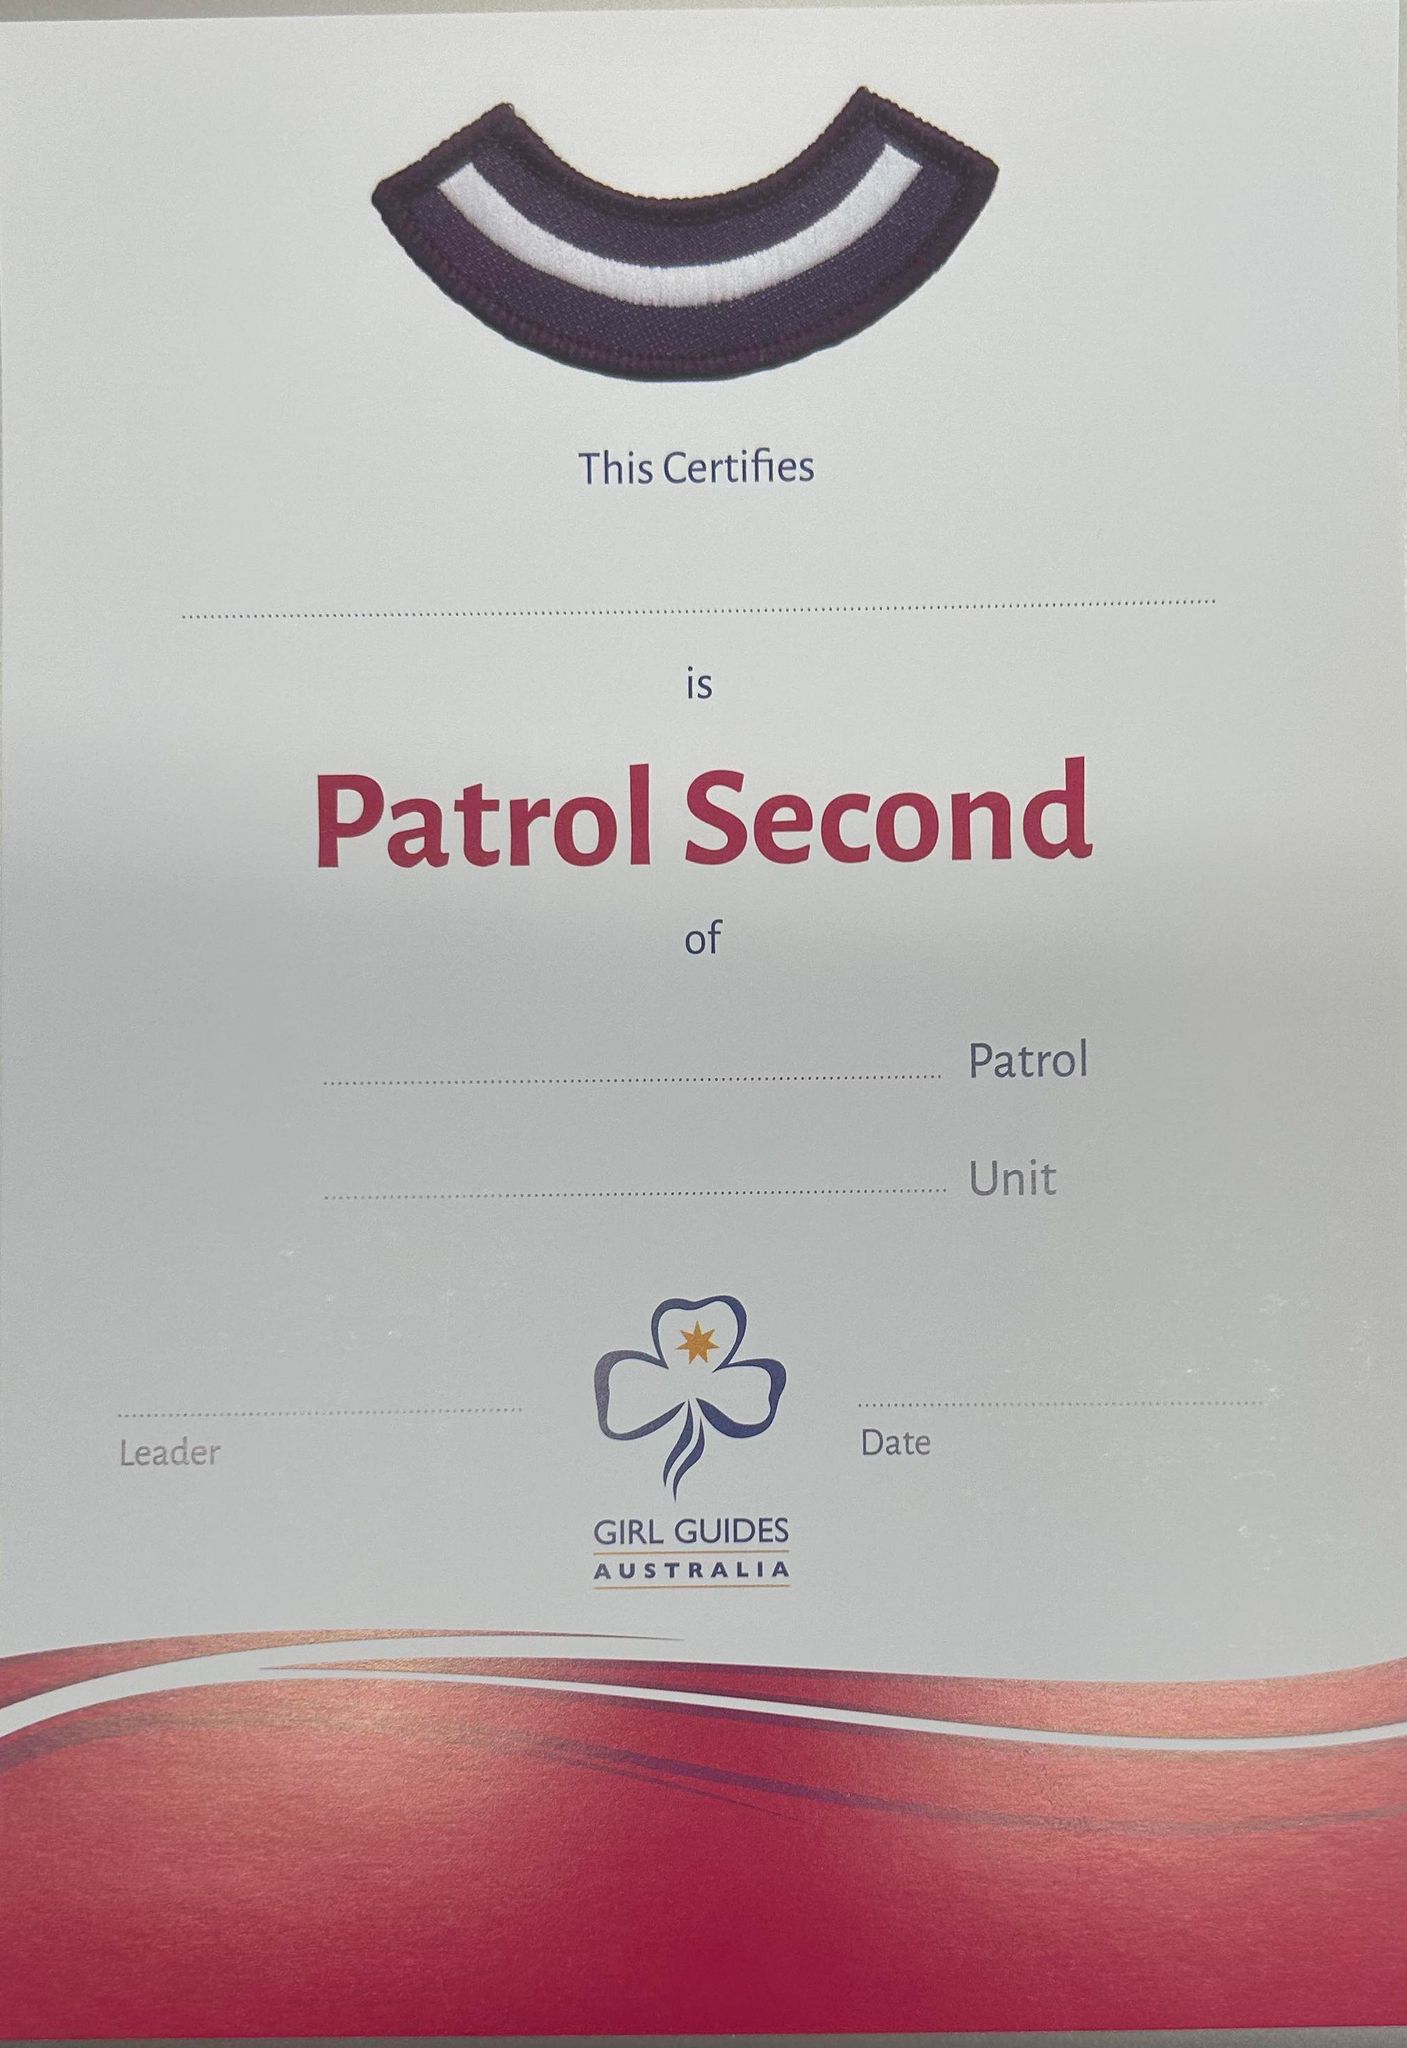 an A5 certificate with patrol second and the stripes on it with red swirls